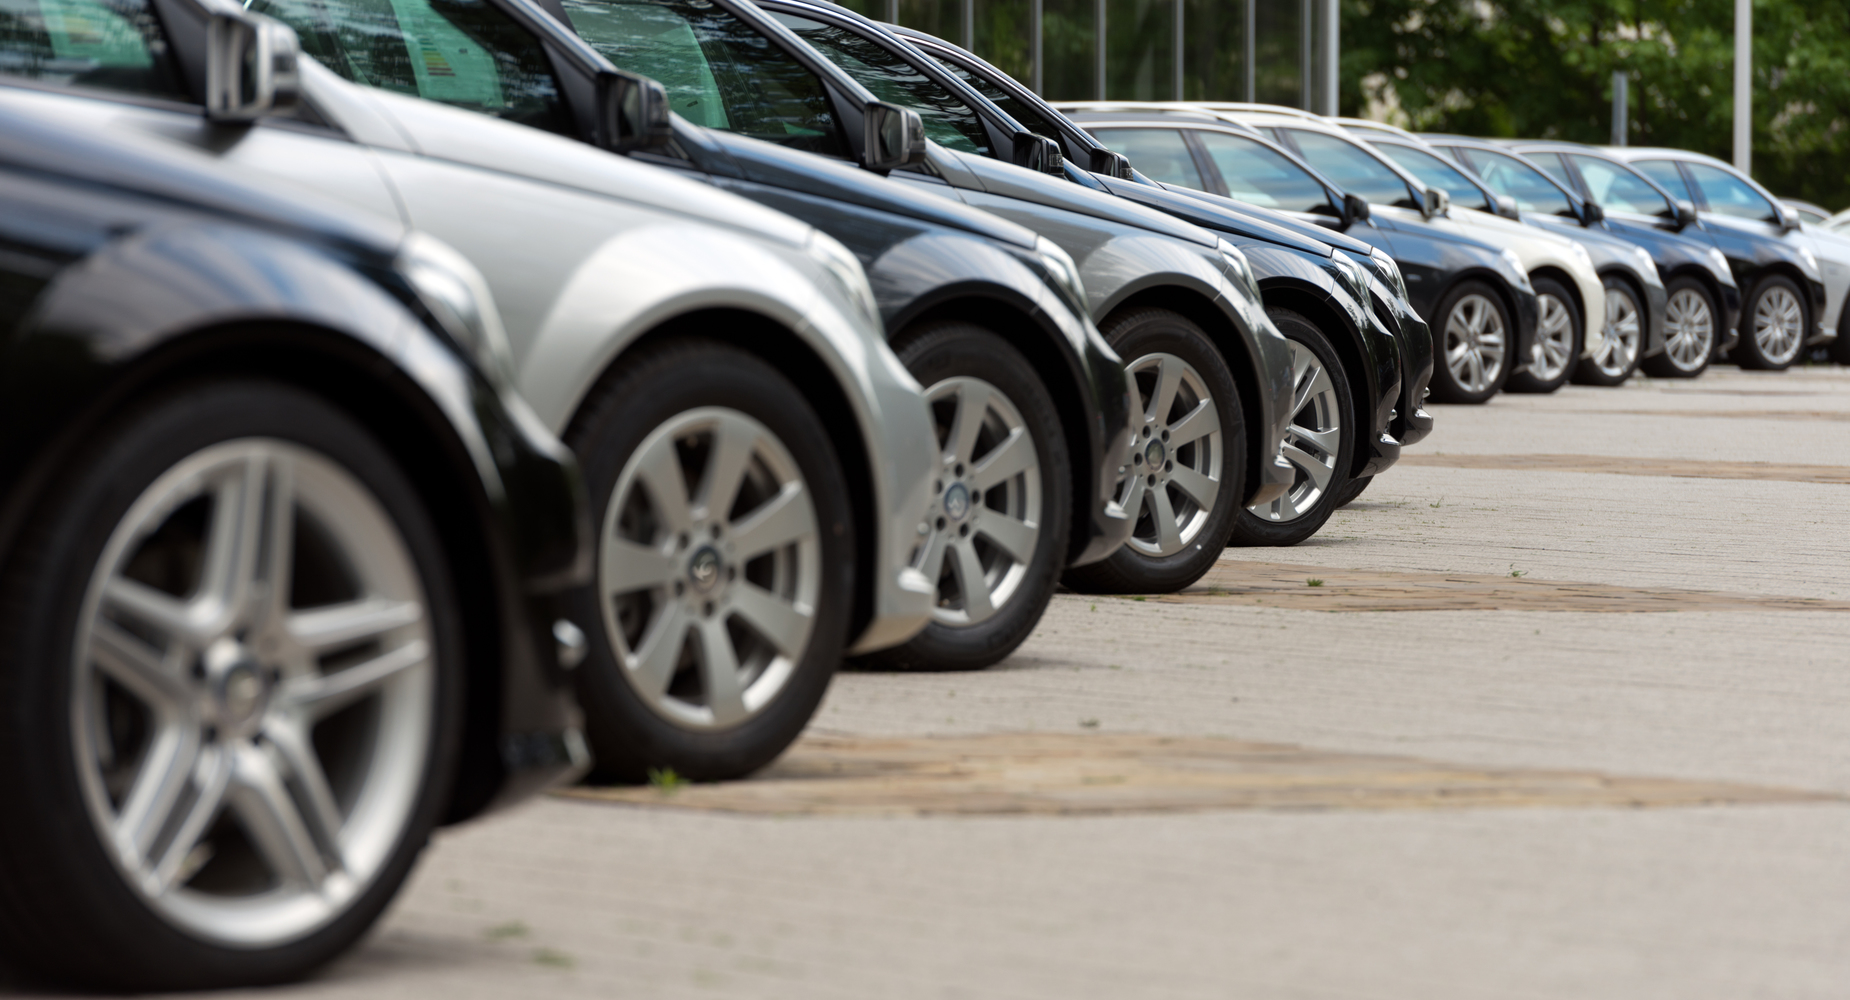 Buying A Used Rental Car? Here’s What You Need To Know